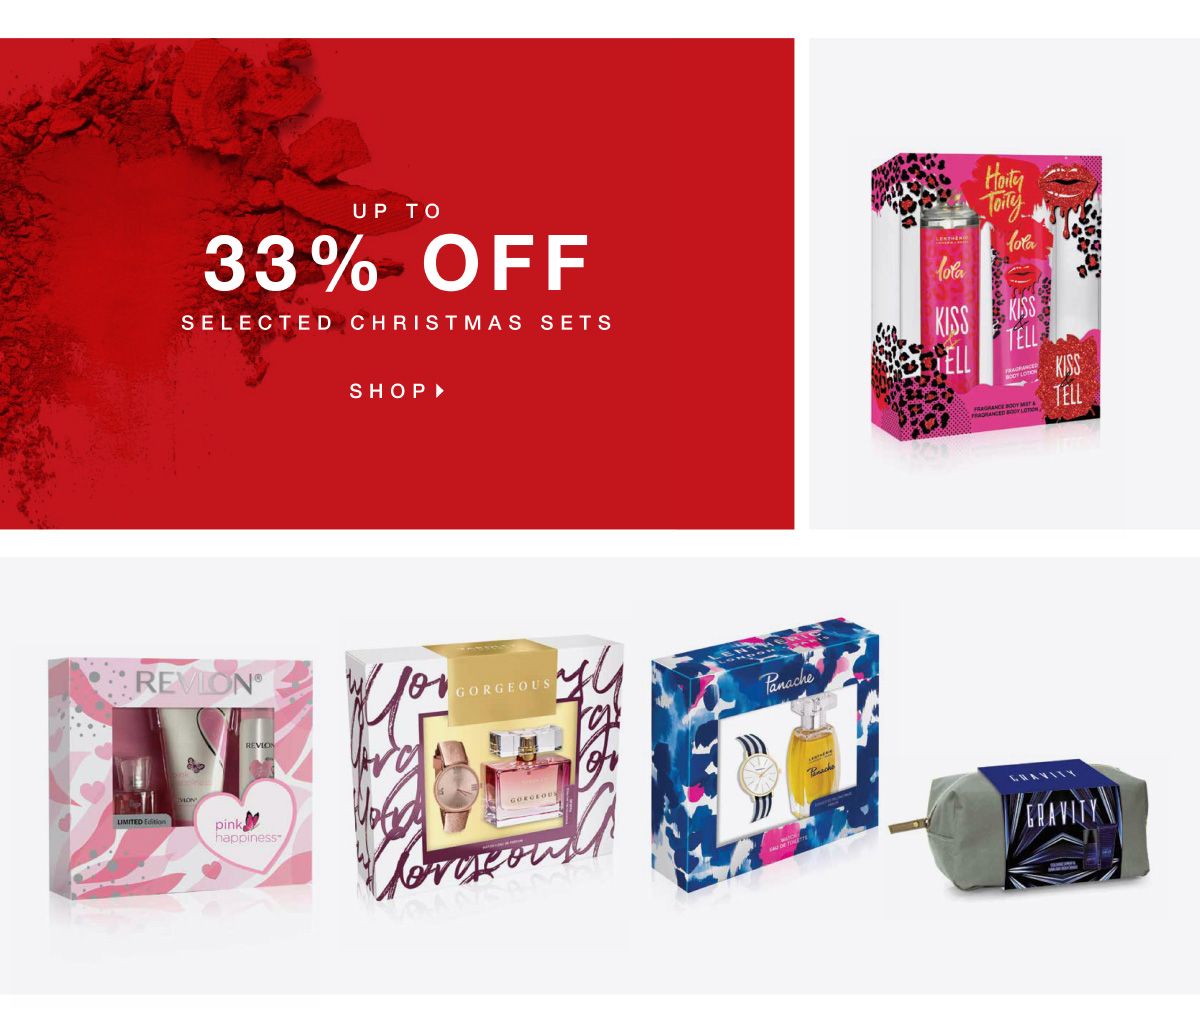 UP TO 33% OFF SELECTED CHRISTMAS SETS. SHOP NOW